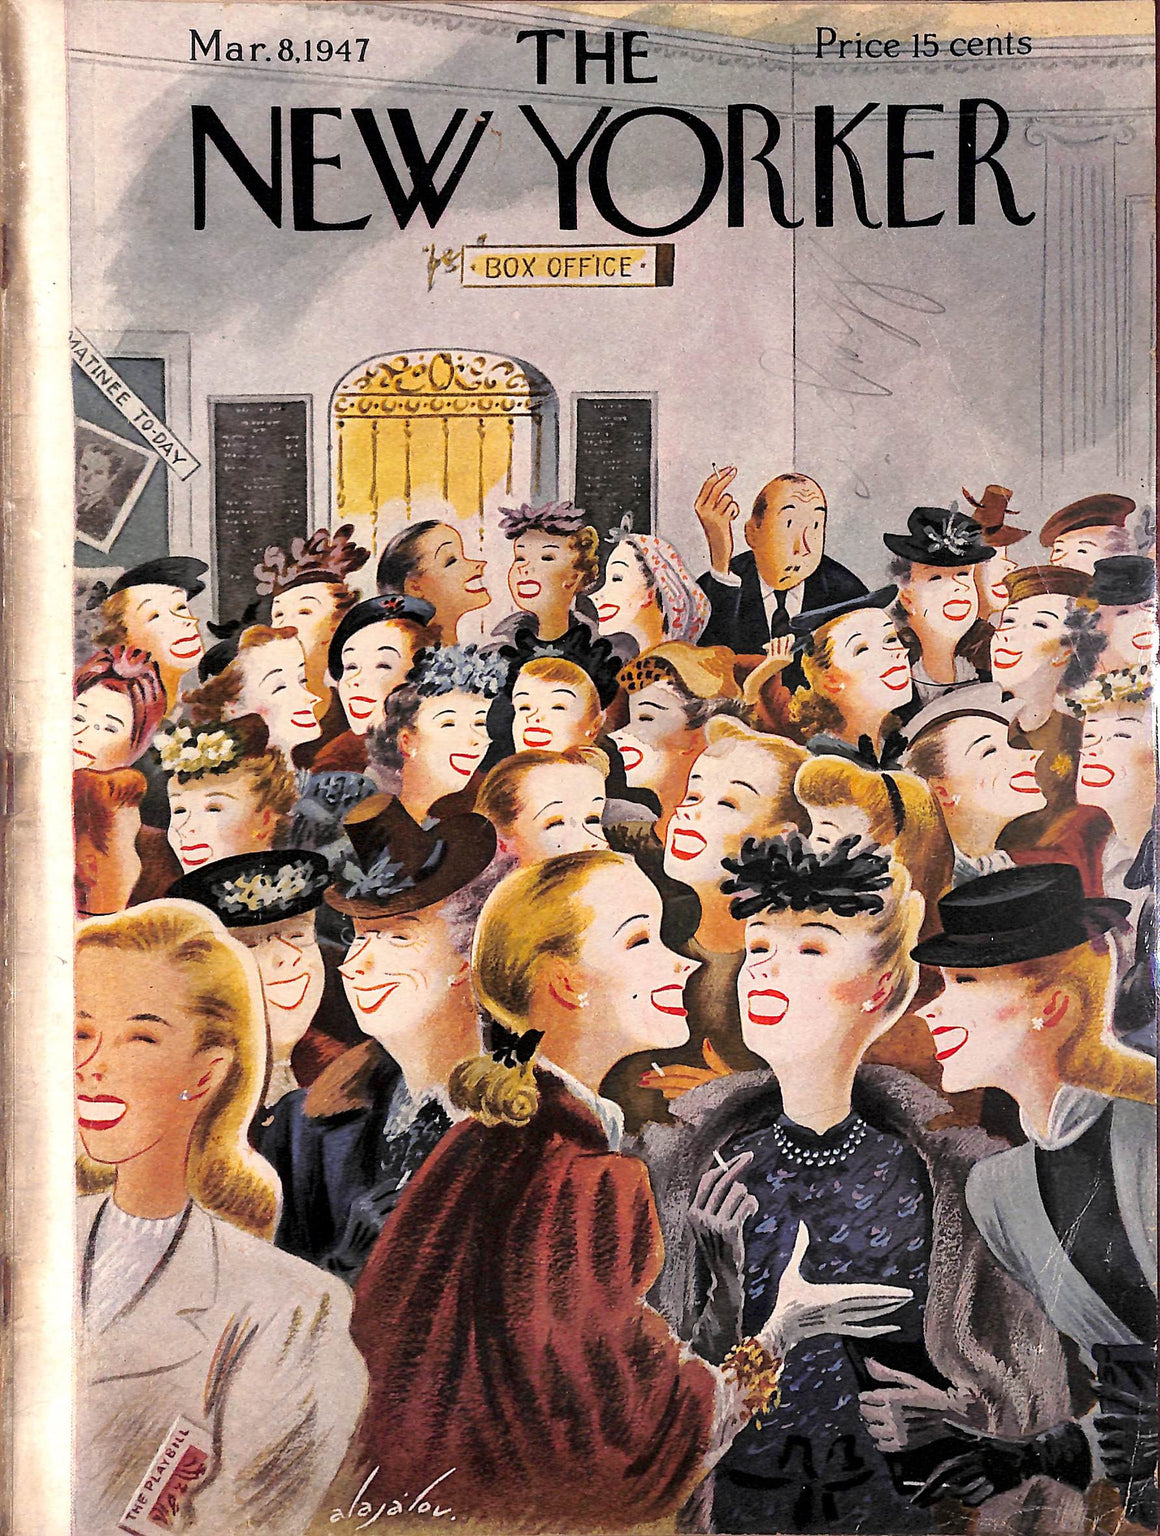 "The New Yorker" Mar. 8, 1947 (SOLD)